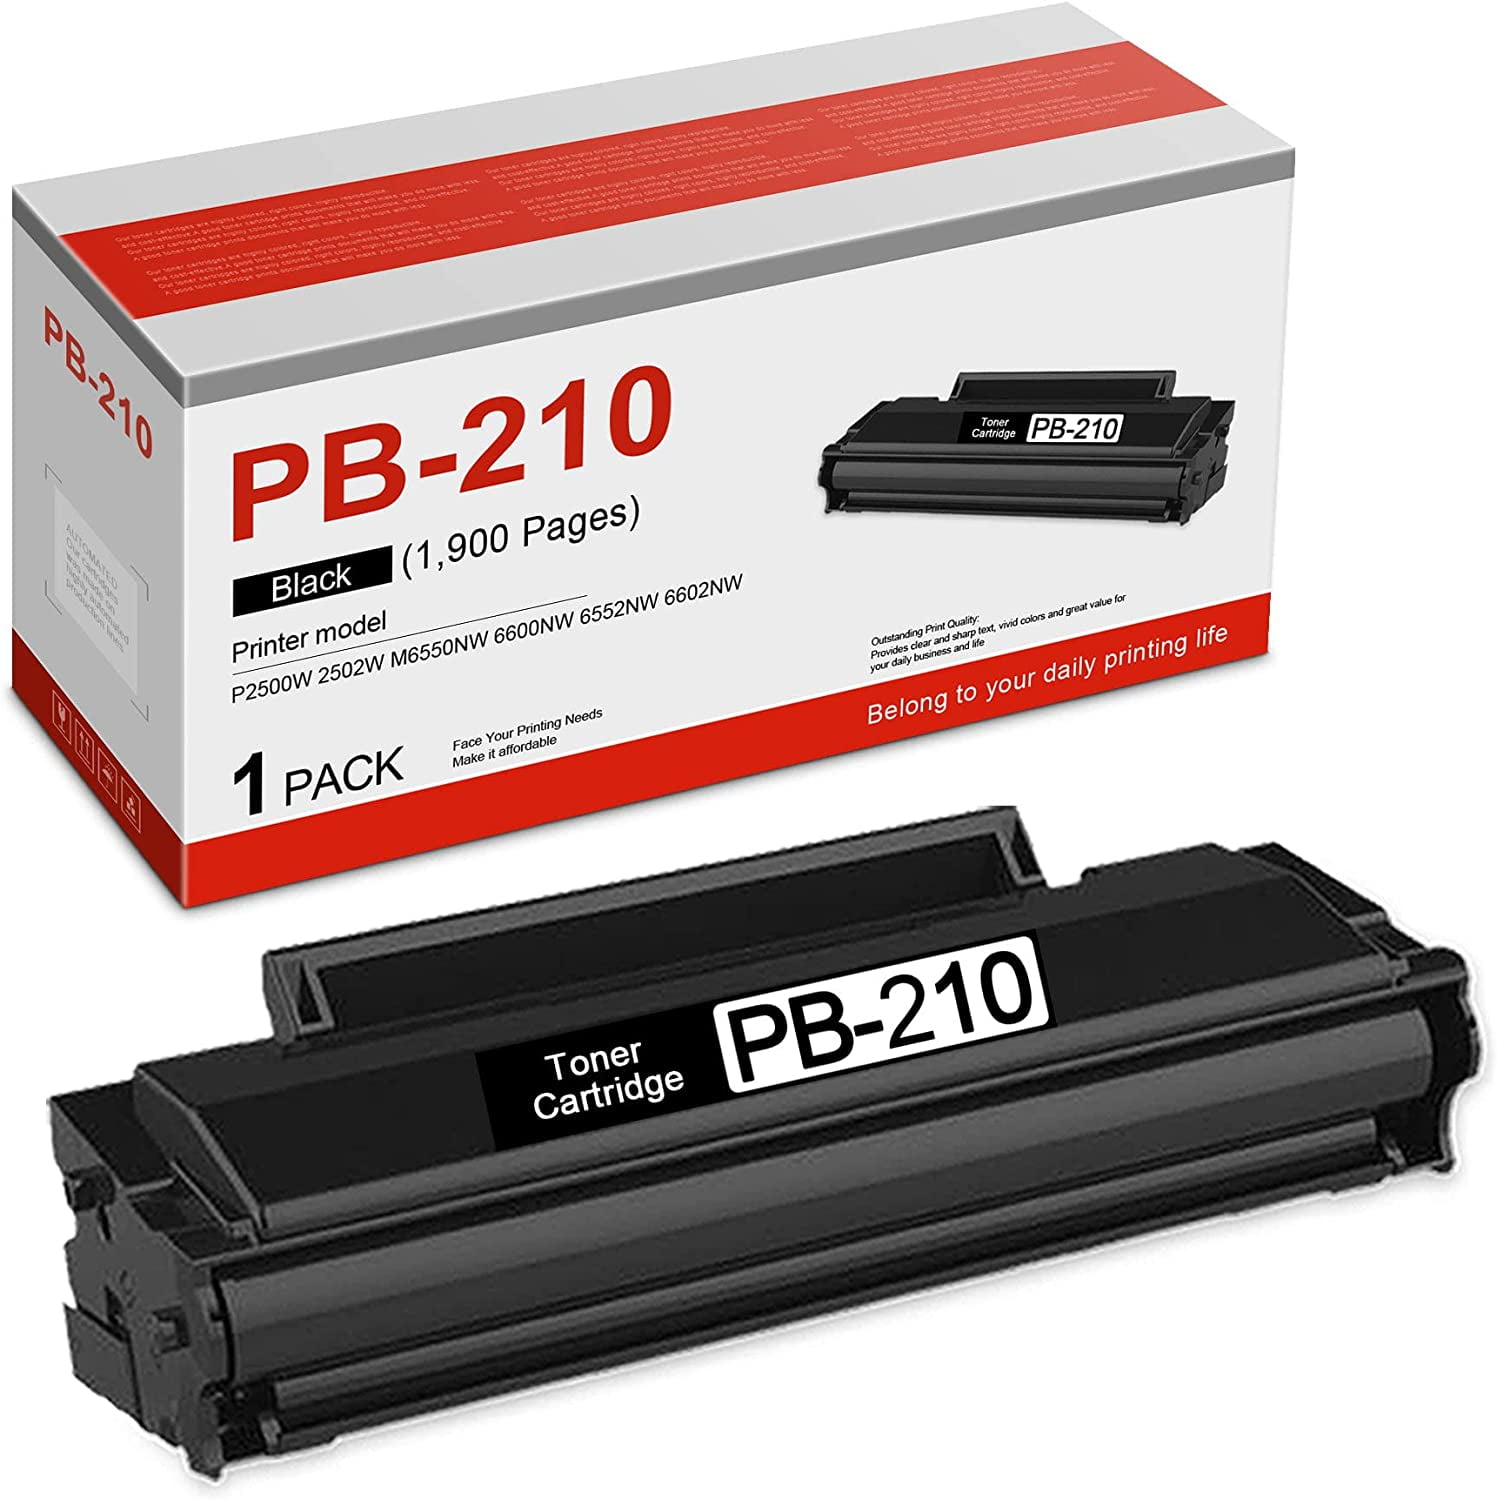 LAIPENG Compatible PA-210 PA210 Toner Cartridge 1600 Pages for P2200 P2500W  P2502W P2508W M6500NW M6500N M6500W M6550NW M6552NW M6558NW M6600N M6600NW  M6602NW M6608NW Printer [Black]: Buy Online at Best Price in UAE 